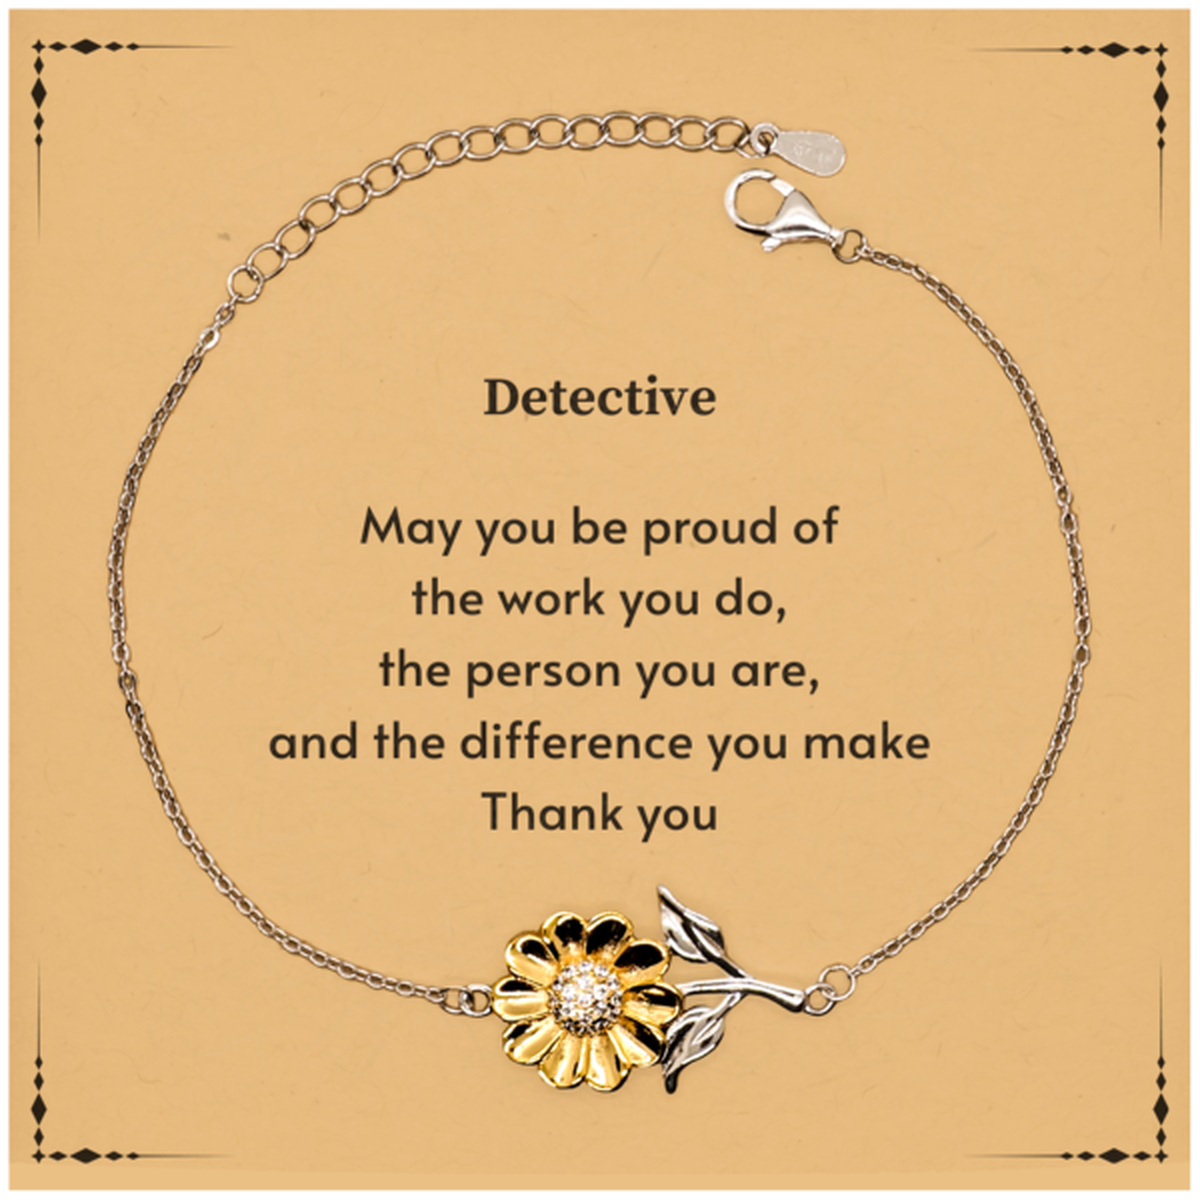 Heartwarming Sunflower Bracelet Retirement Coworkers Gifts for Detective, Detective May You be proud of the work you do, the person you are Gifts for Boss Men Women Friends